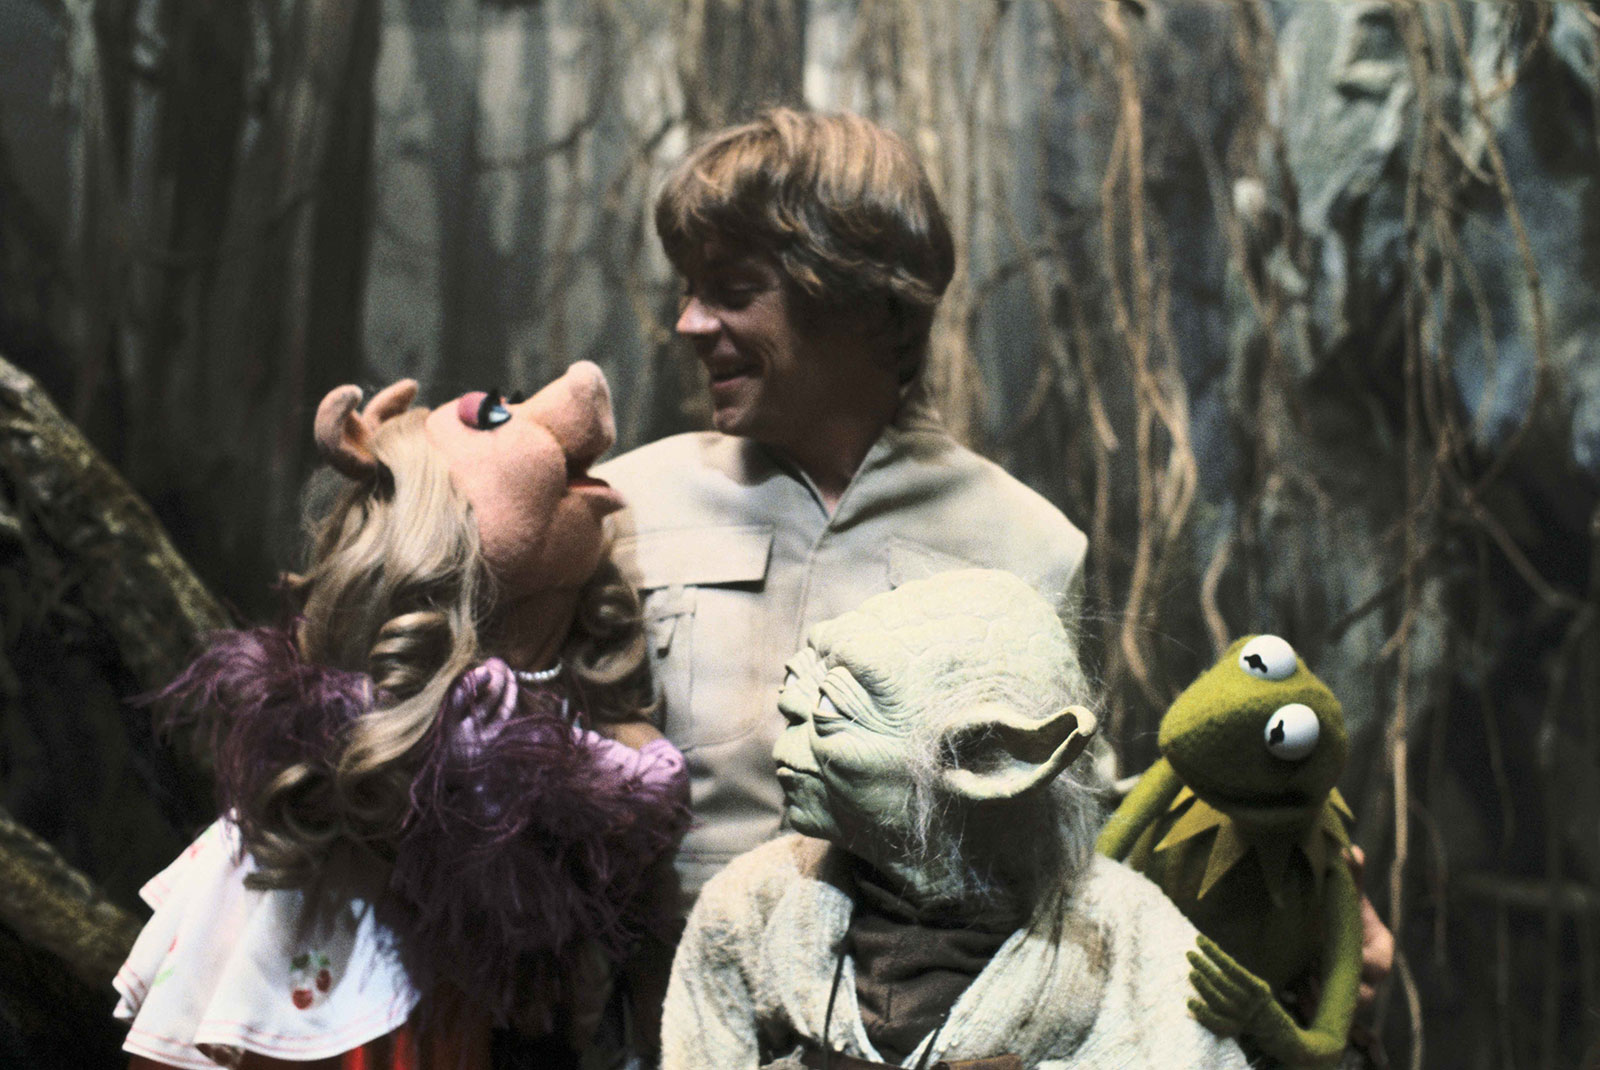 Kermit and Piggy visit Mark Hamill and Yoda on the Dagobah set